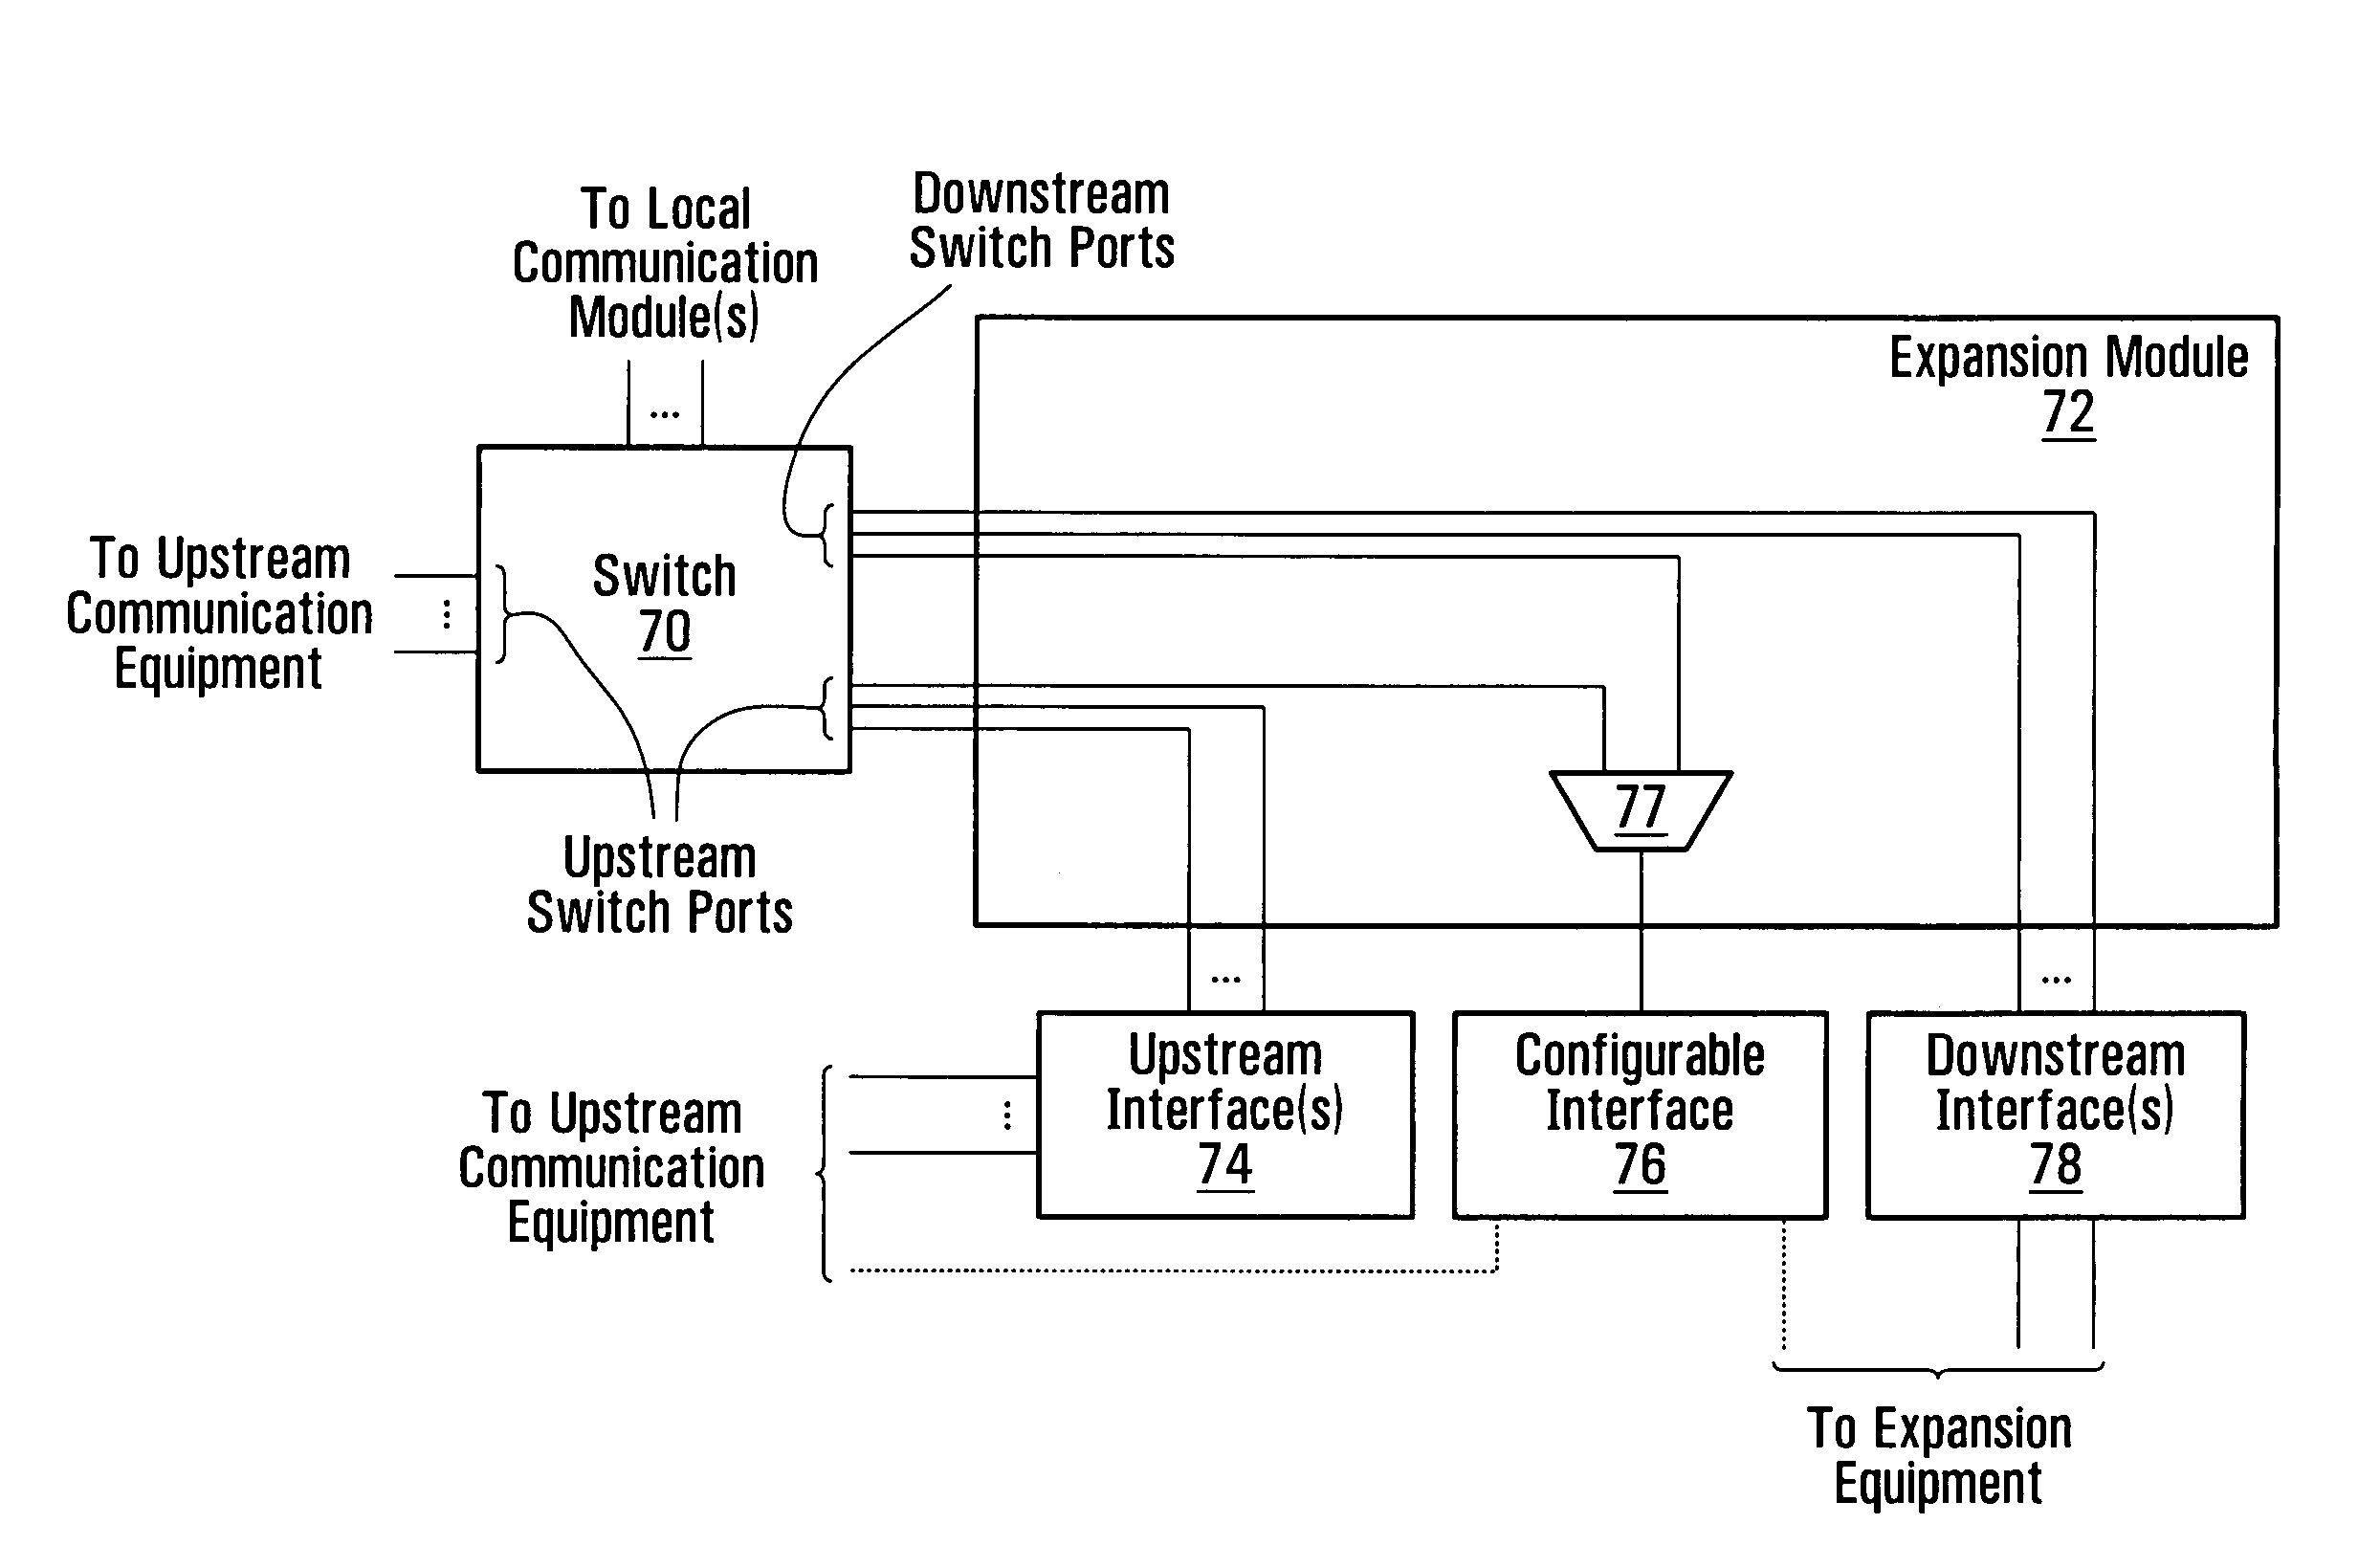 Distributed communication equipment architectures and techniques